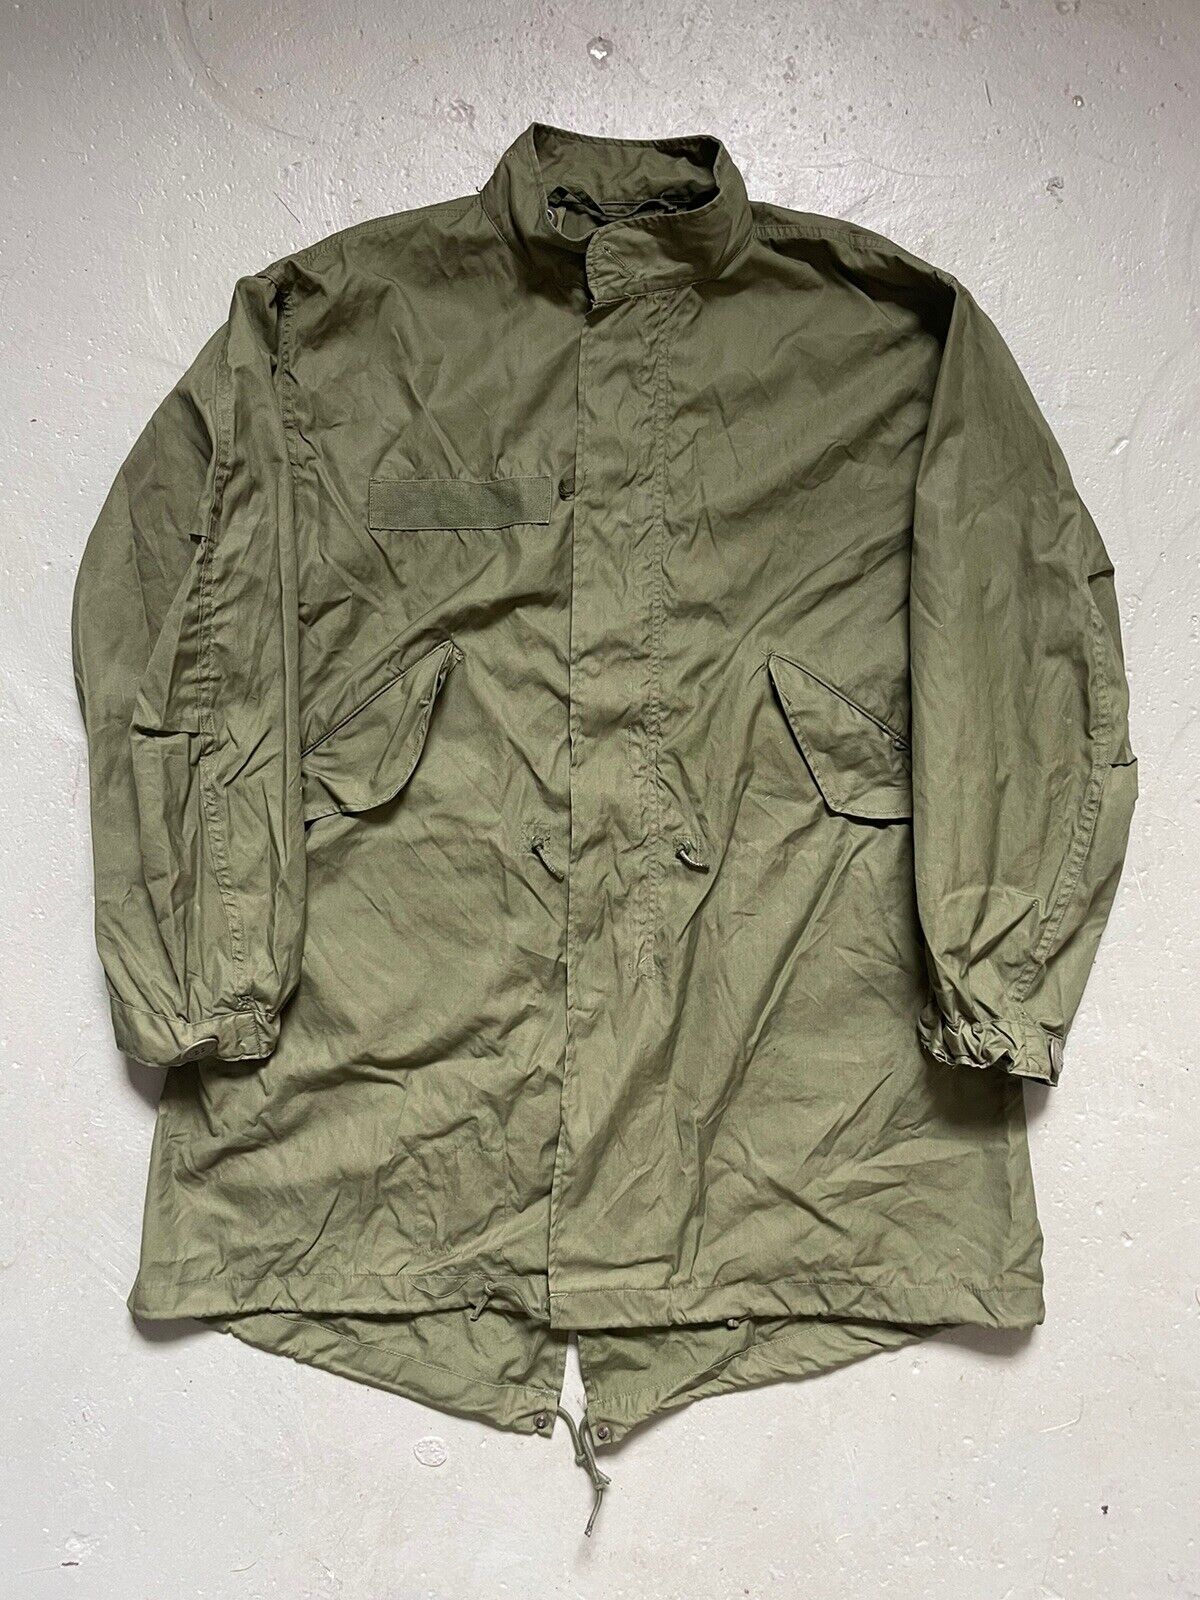 Vintage 1970s M-65 Fishtail US Military Parka Jacket Army Green Small-Regular